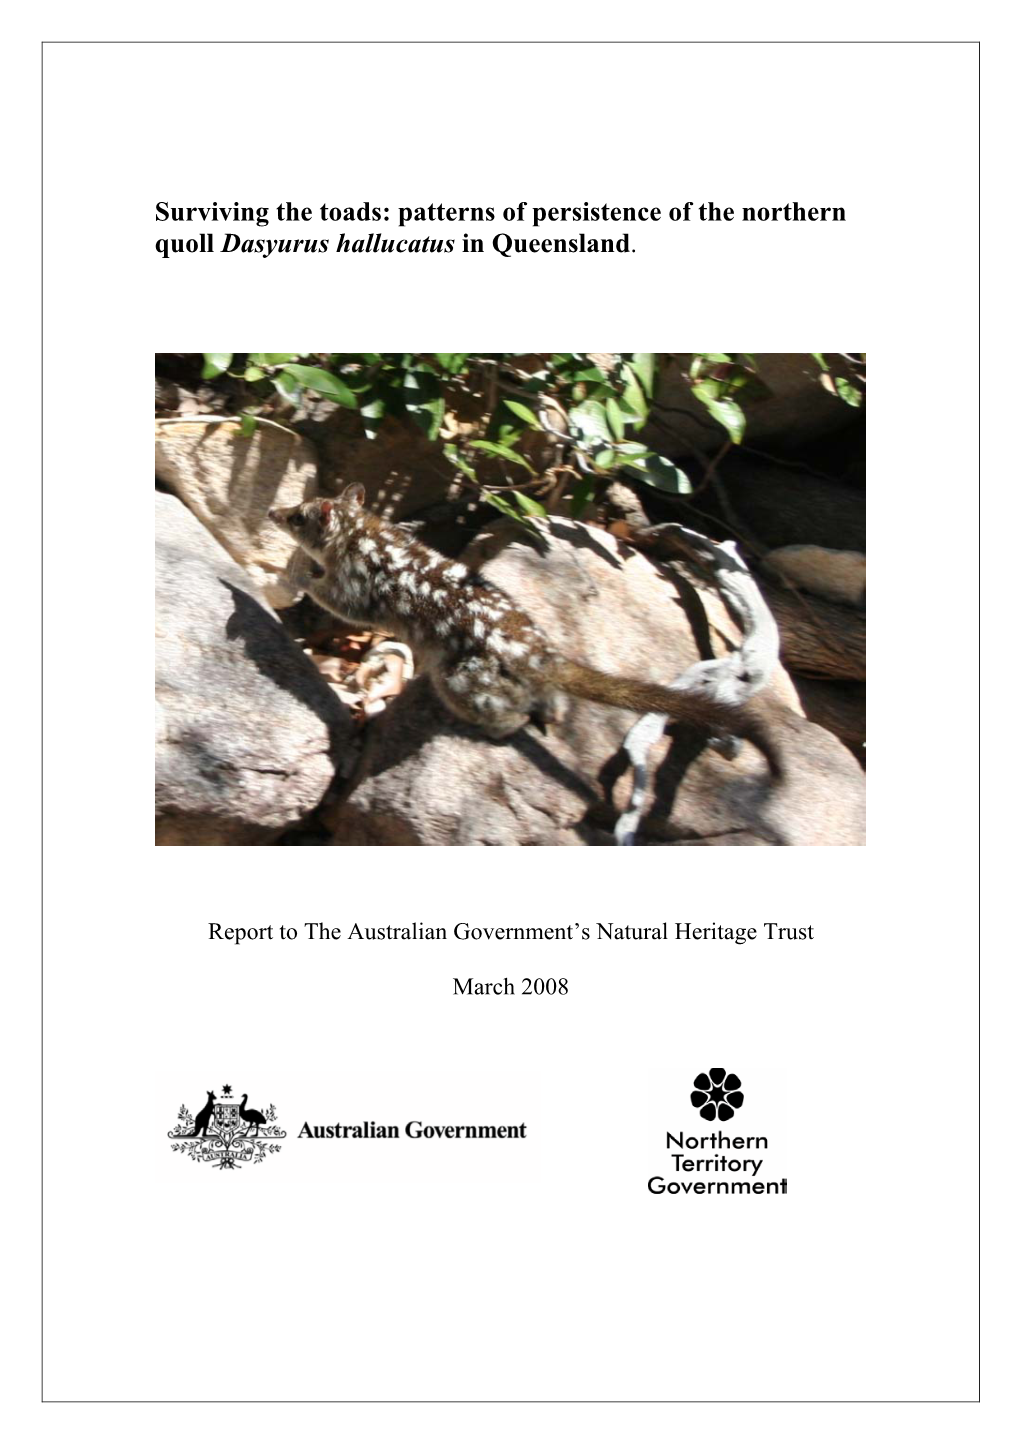 Patterns of Persistence of the Northern Quoll Dasyurus Hallucatus in Queensland